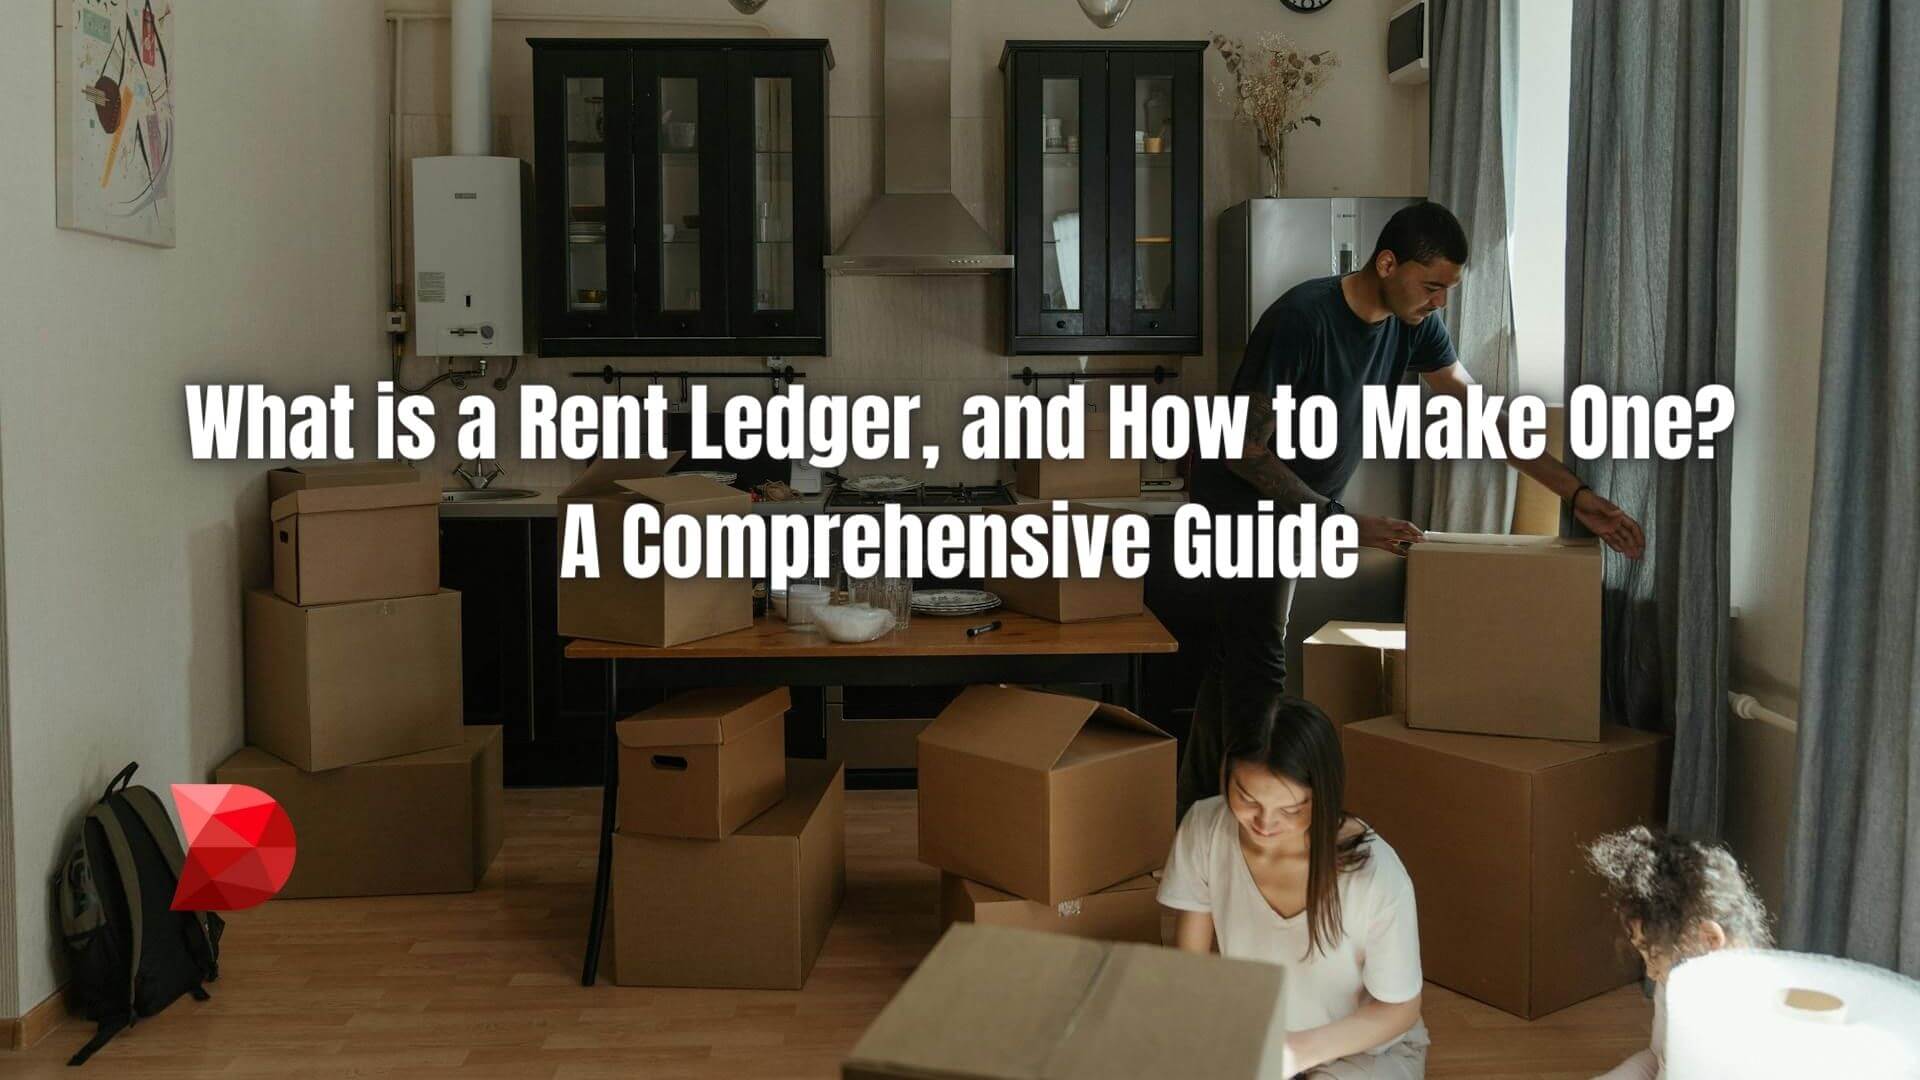 Learn about the rent ledger and the creation process. Here's a step-by-step guide for efficient rental property financial management.